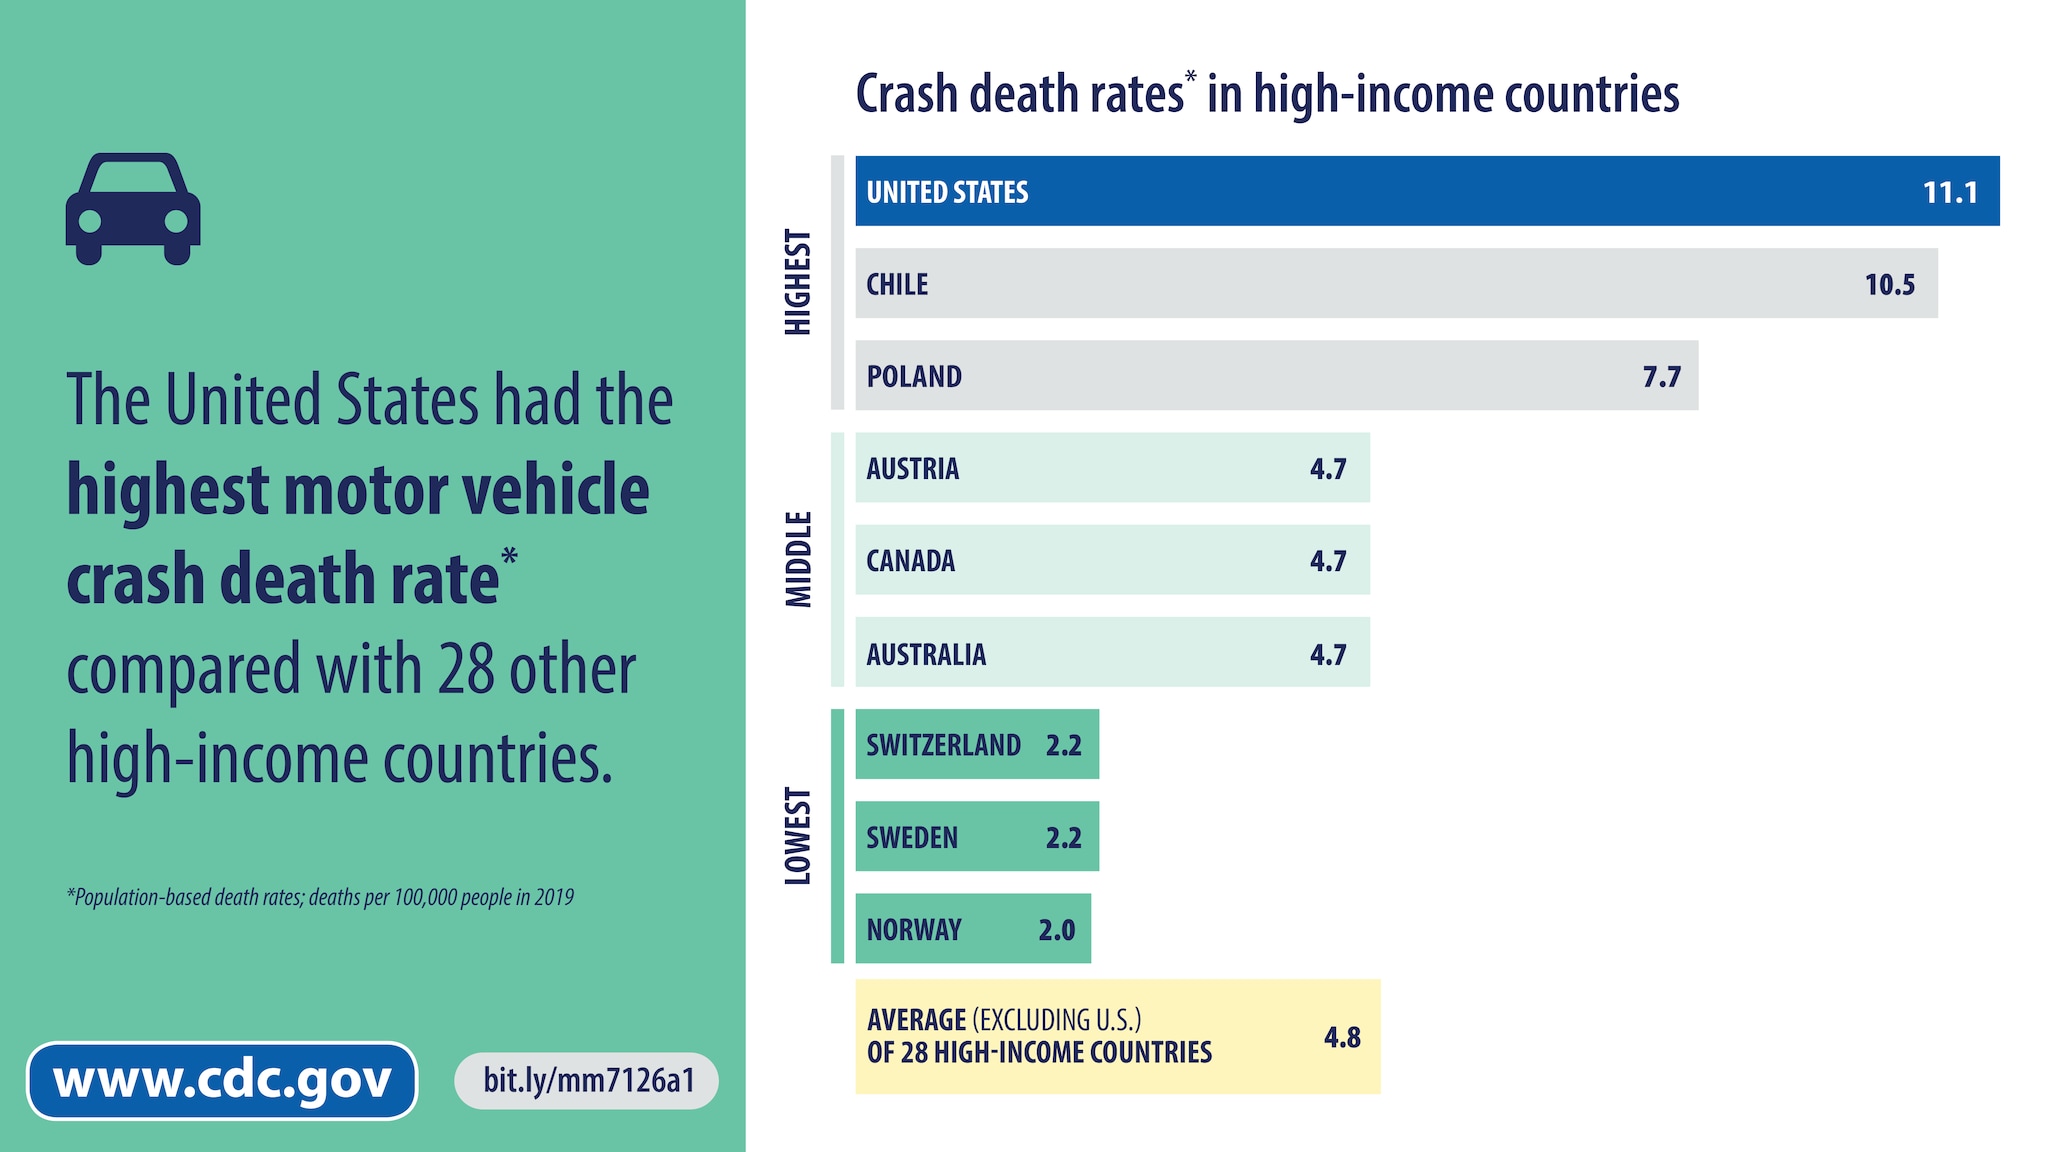 Road Safety in Vietnam  Traffic accidents, crash, fatalities